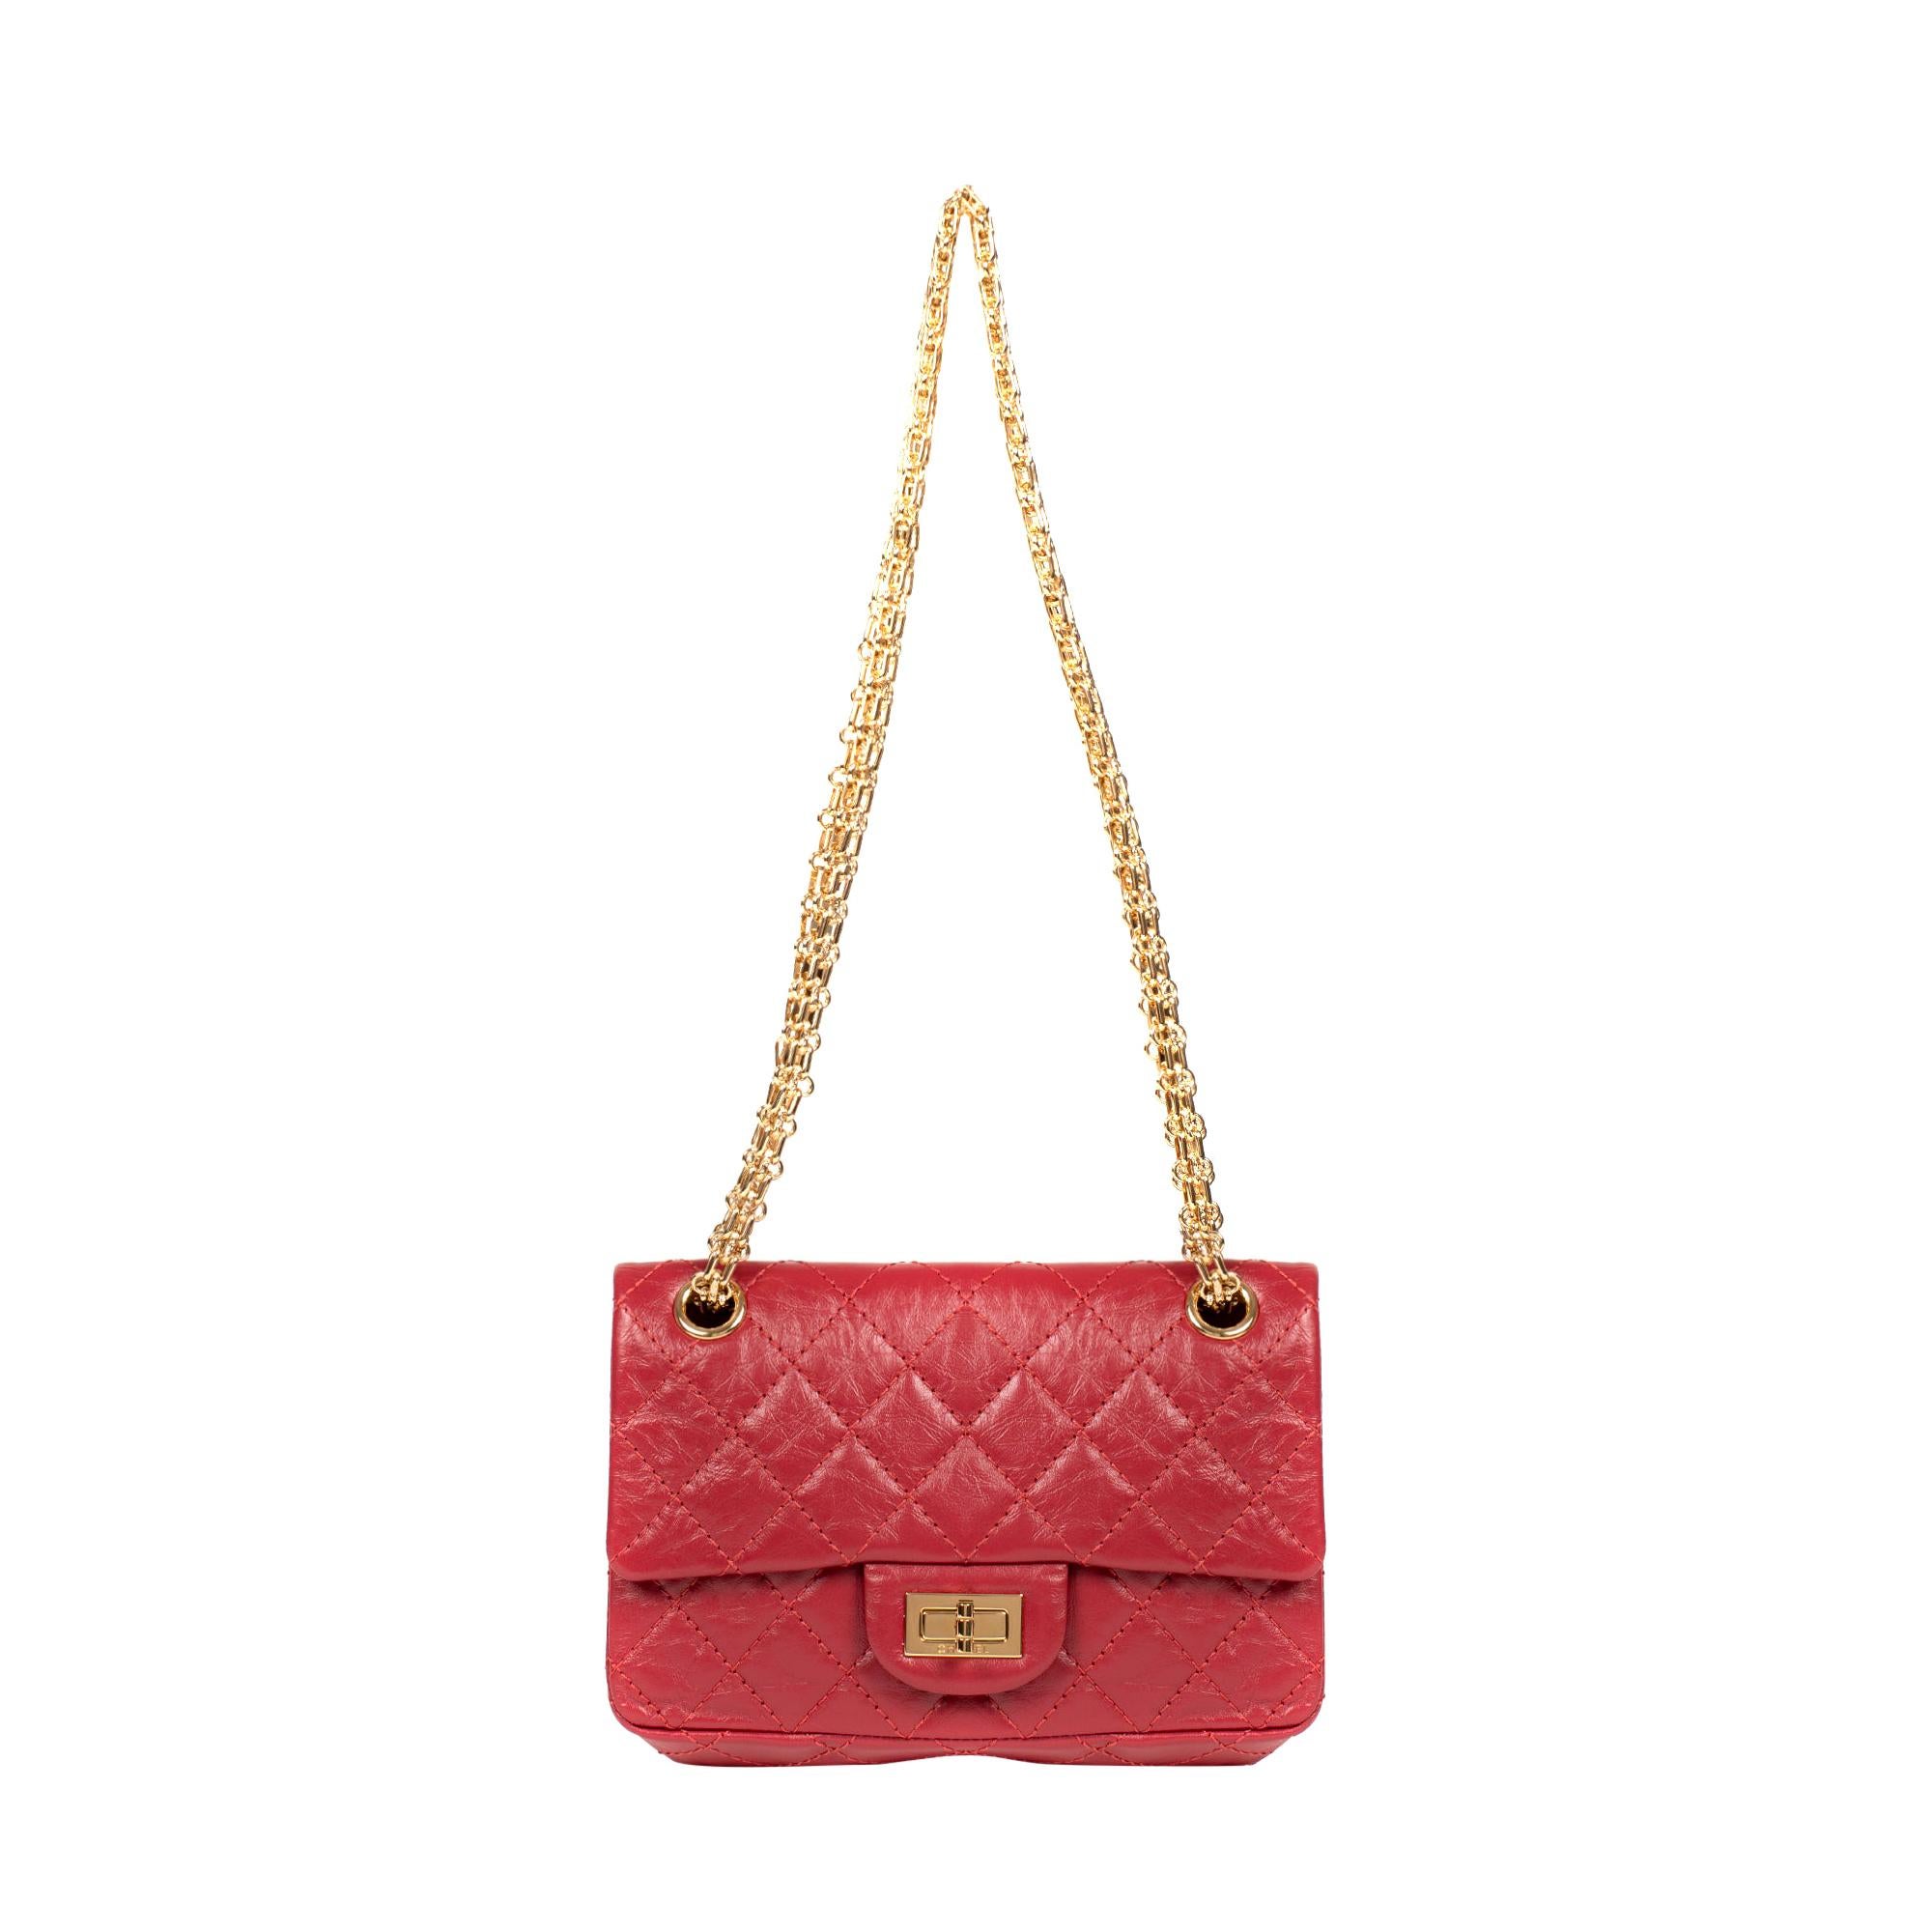 Rare Mini Chanel 2.55 Reissue handbag in red quilted leather, gold ...